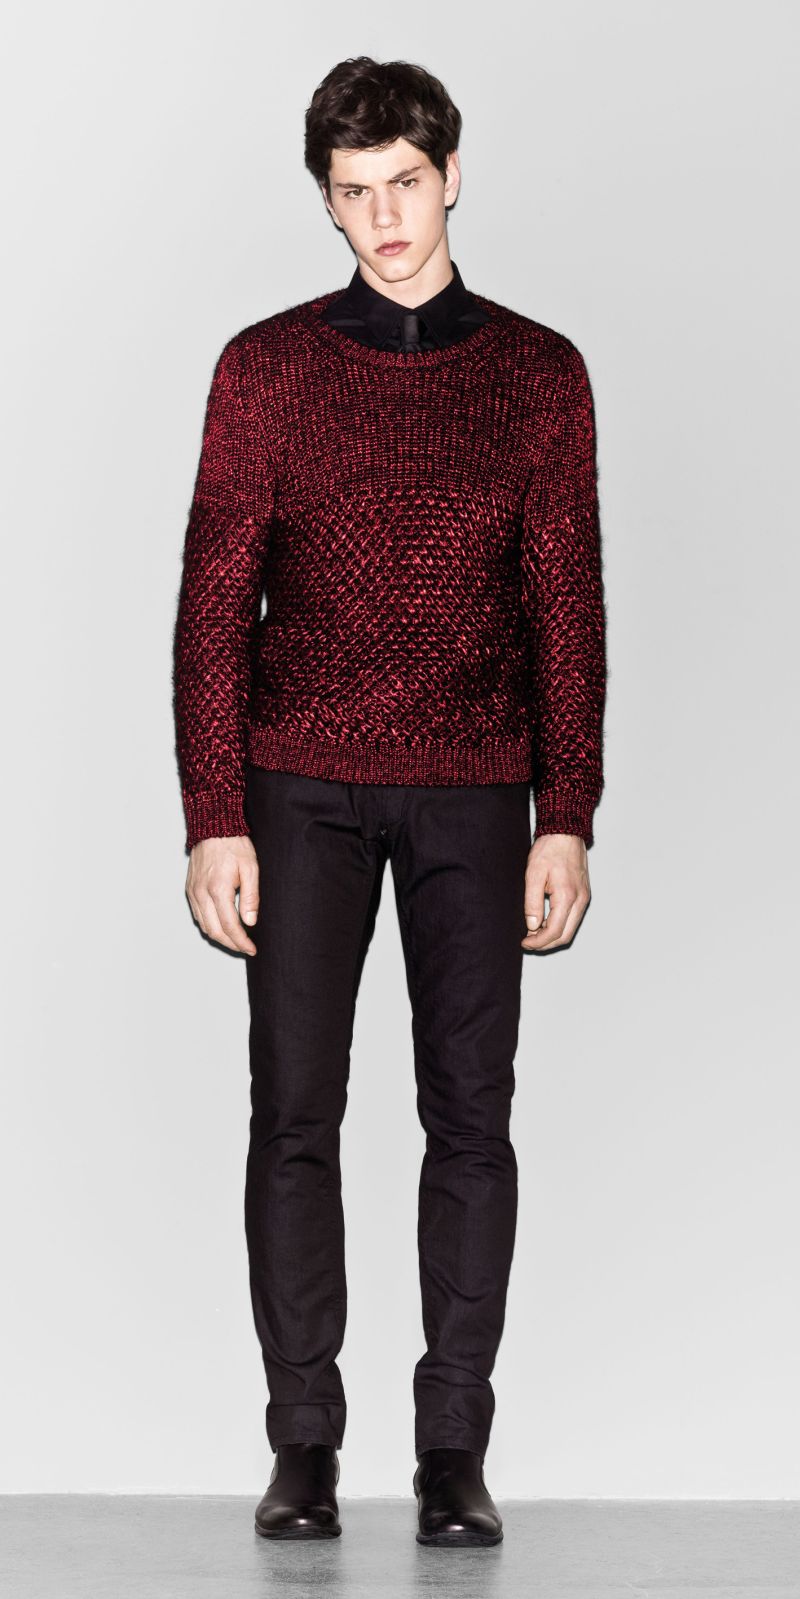 Simone Nobili Cleans Up for a Look at Sisley Fall/Winter 2012